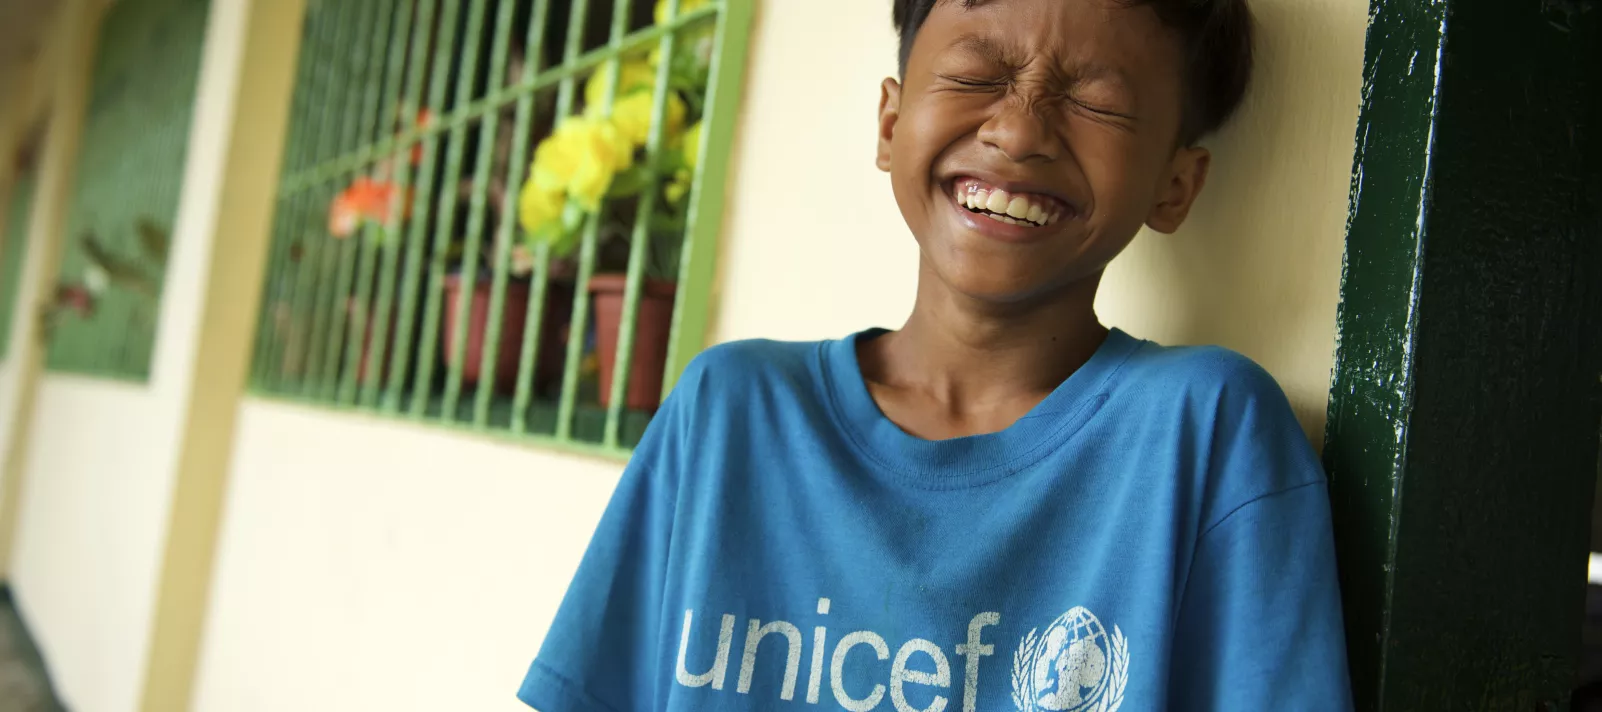 A boy in a blue UNICEF shirt smiling towards the camera with his eyes closed